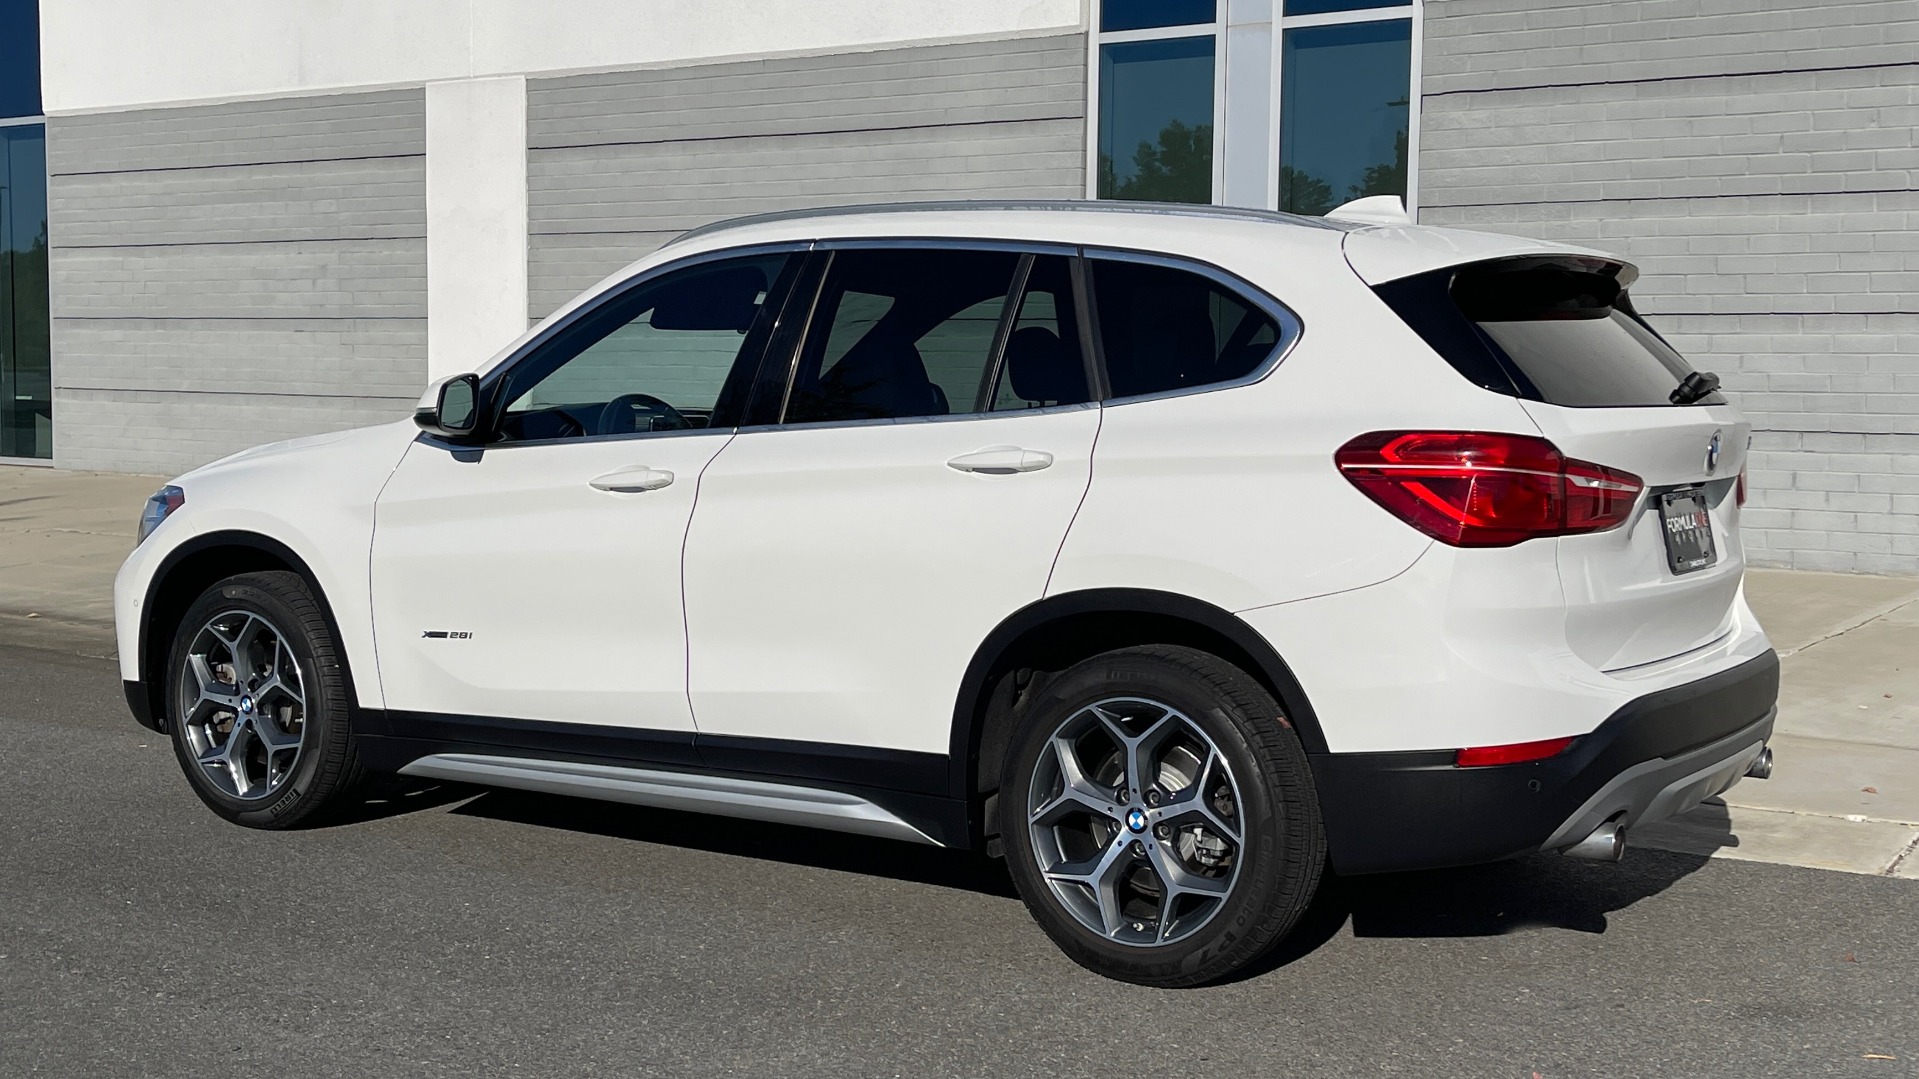 Used 2018 BMW X1 XDRIVE28I / CONV PKG / PANO-ROOF / PARK ASST / REARVIEW for sale Sold at Formula Imports in Charlotte NC 28227 4